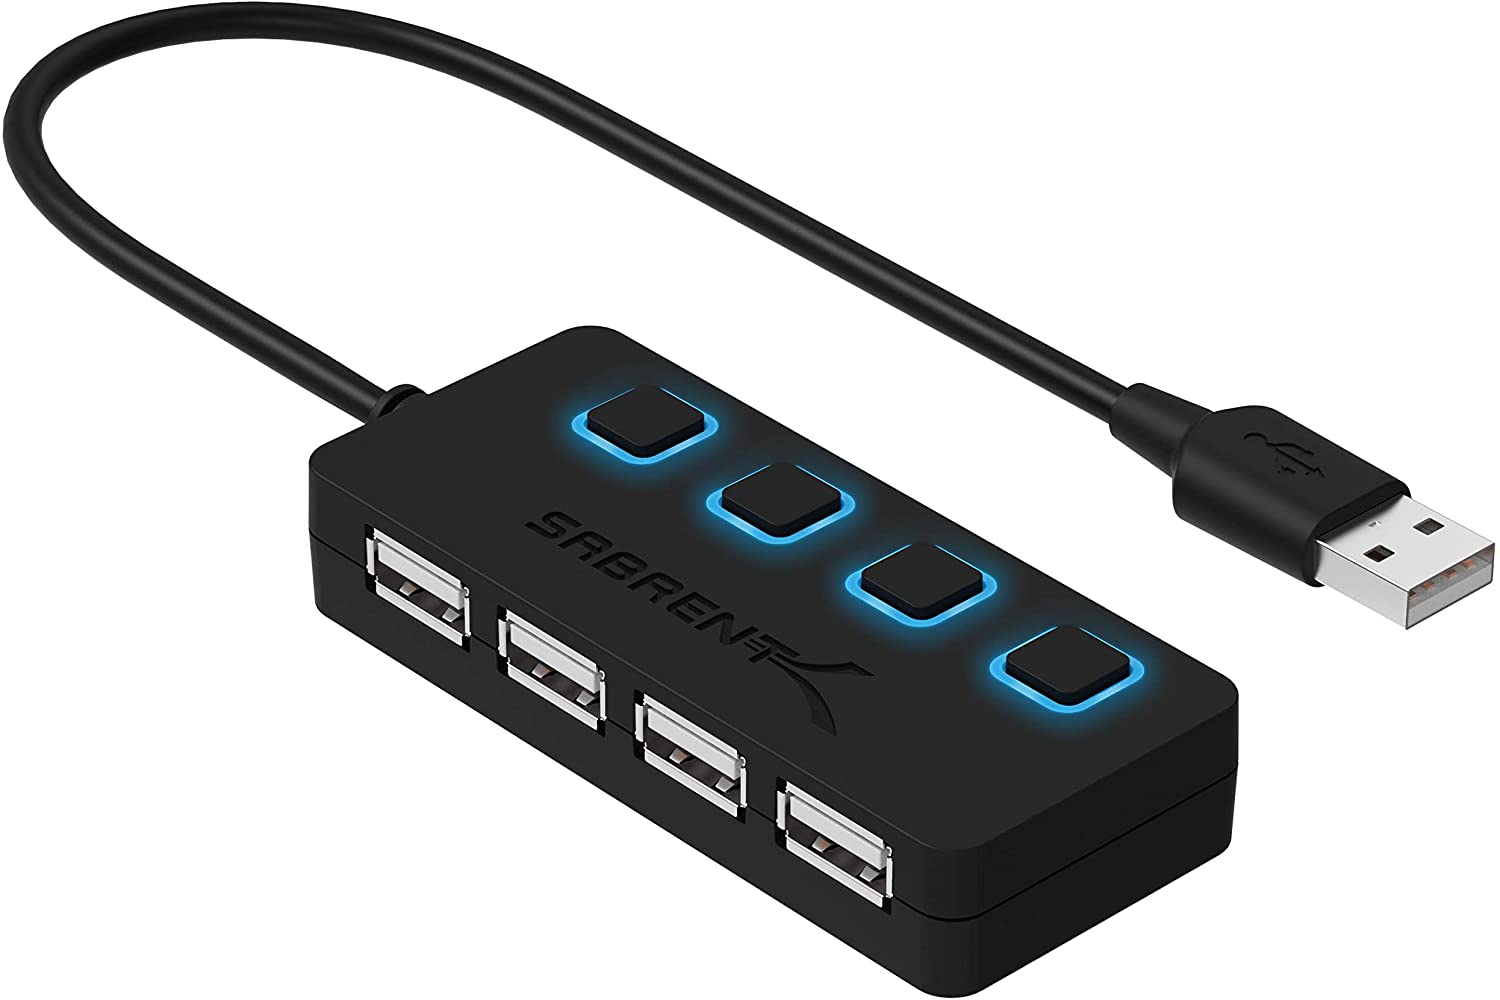 Amazon.com: Sabrent 4-Port USB 2.0 Hub with Individual LED lit Power  Switches (HB-UMLS): Computers & Accessories